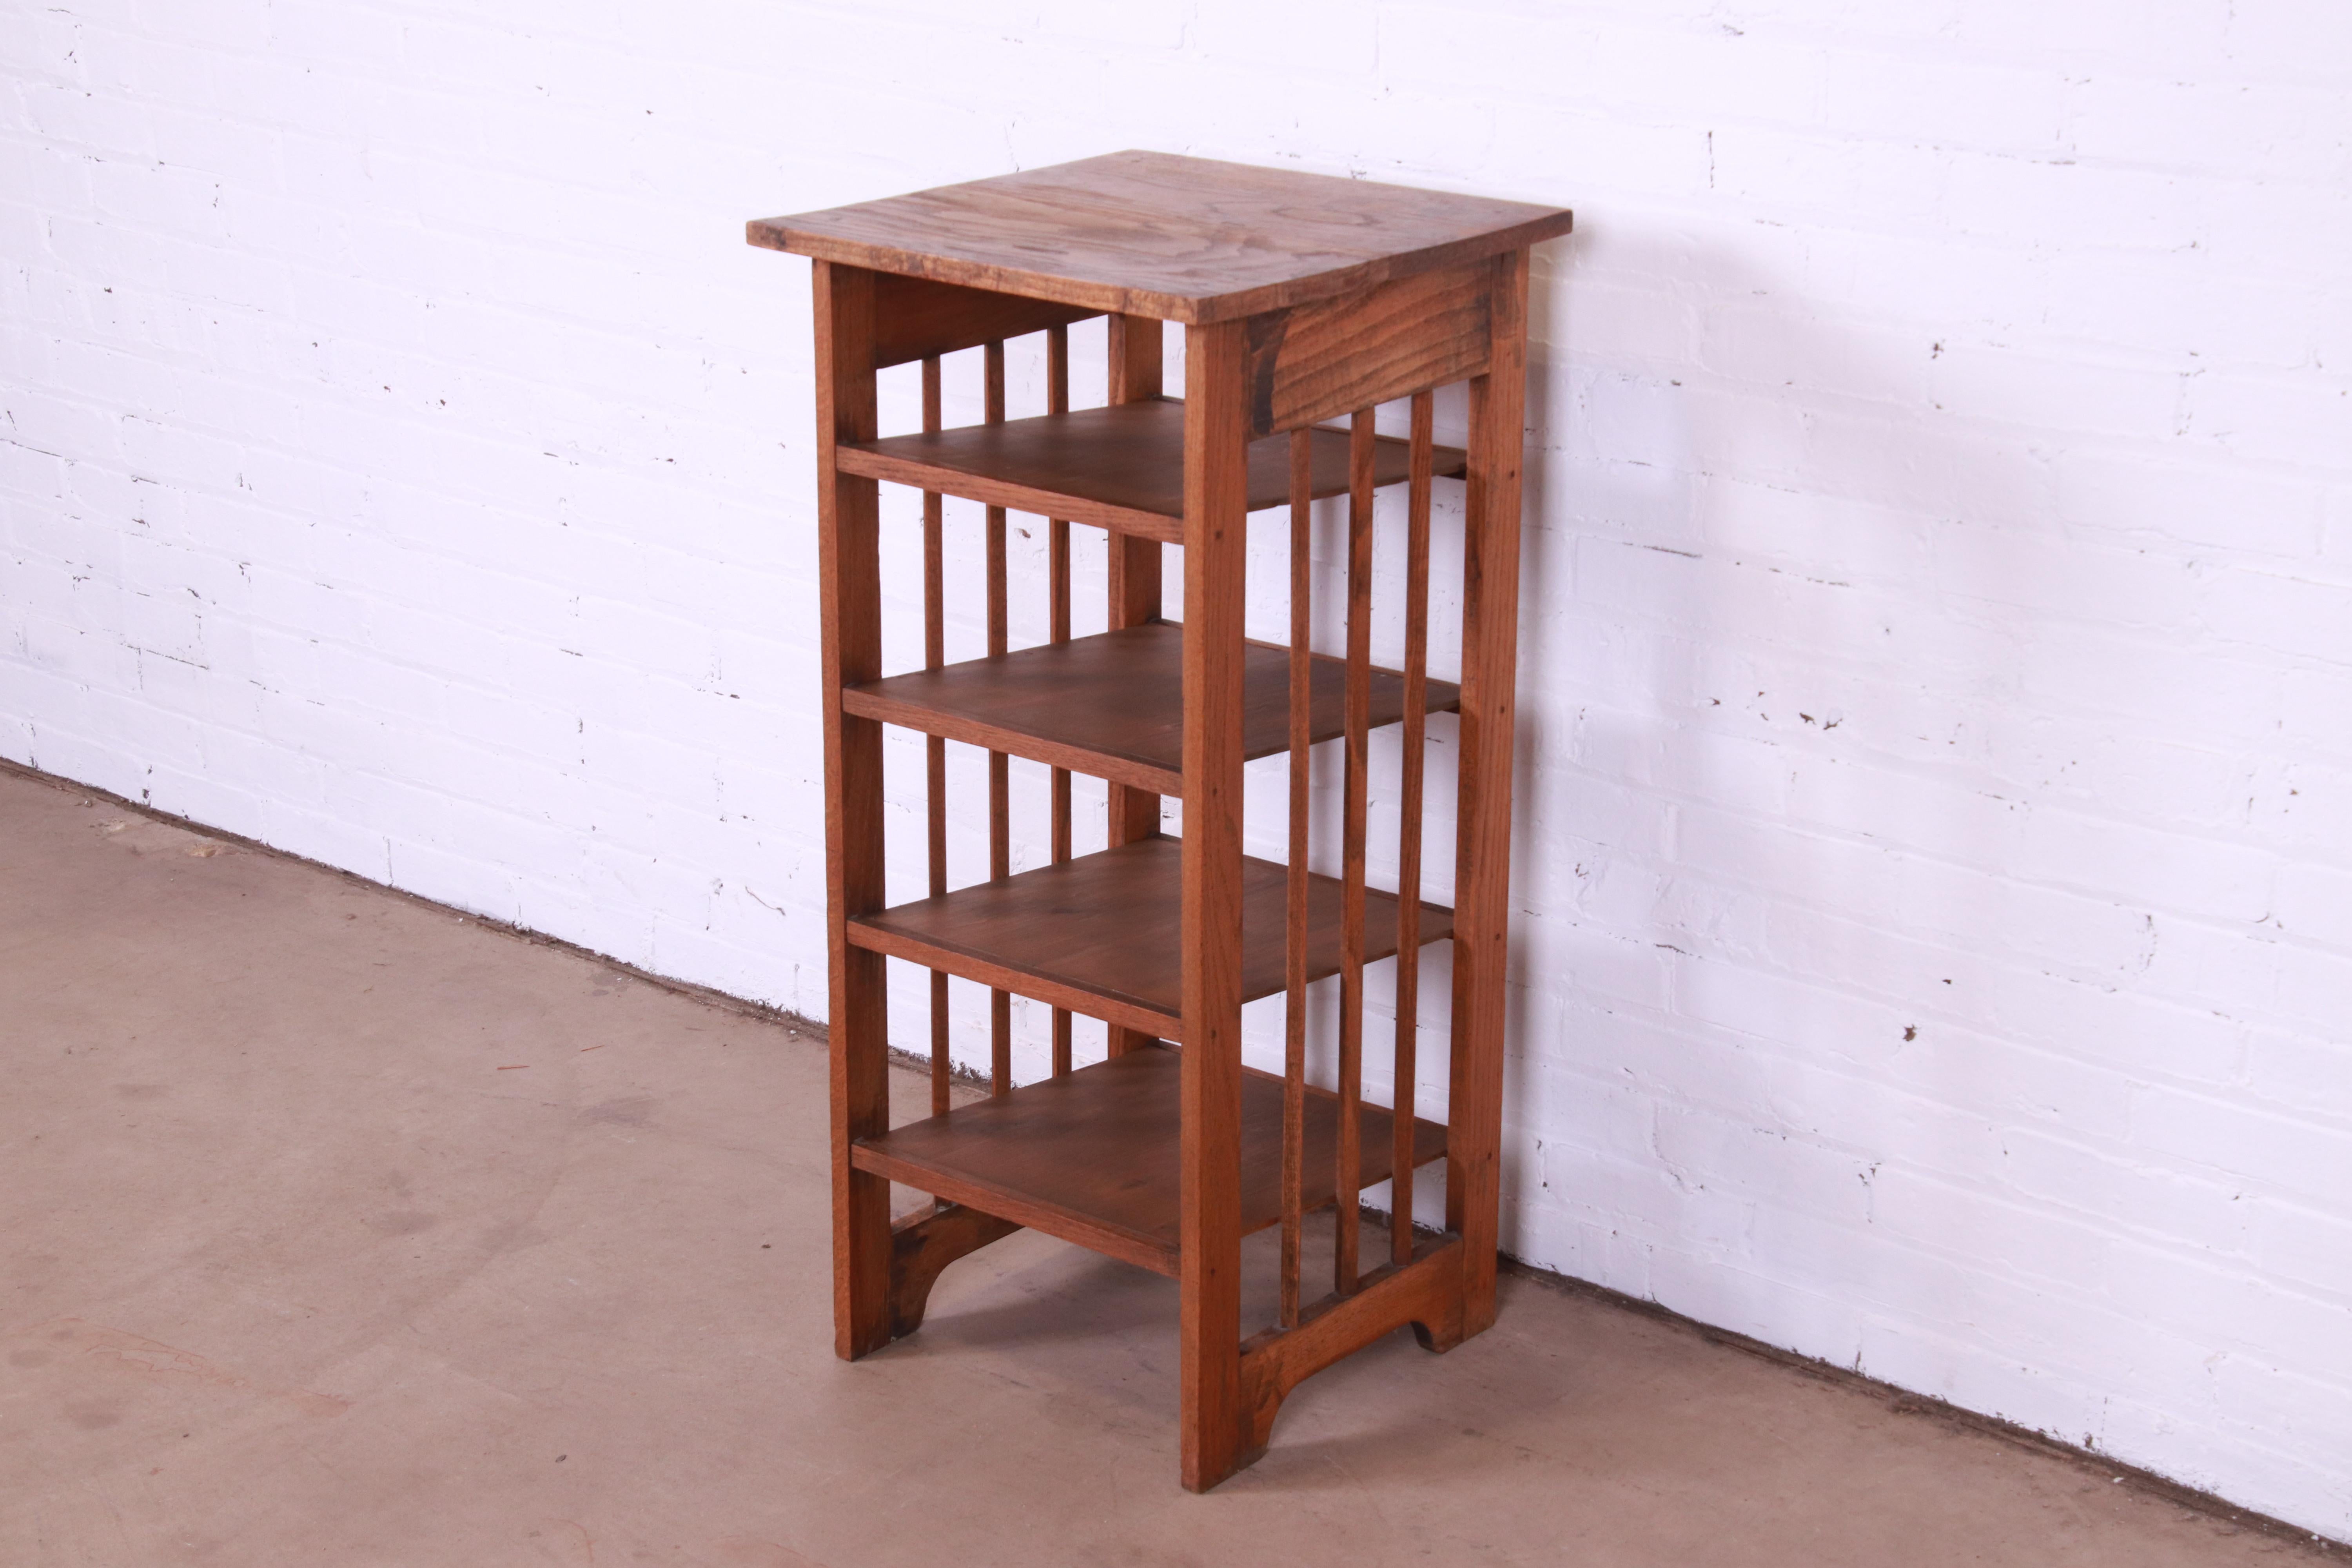 A beautiful antique Mission oak Arts & Crafts five-tier side table or bookshelf

Recently procured from Frank Lloyd Wright's DeRhodes House

In the manner of Stickley

USA, Circa 1920s

Measures: 18